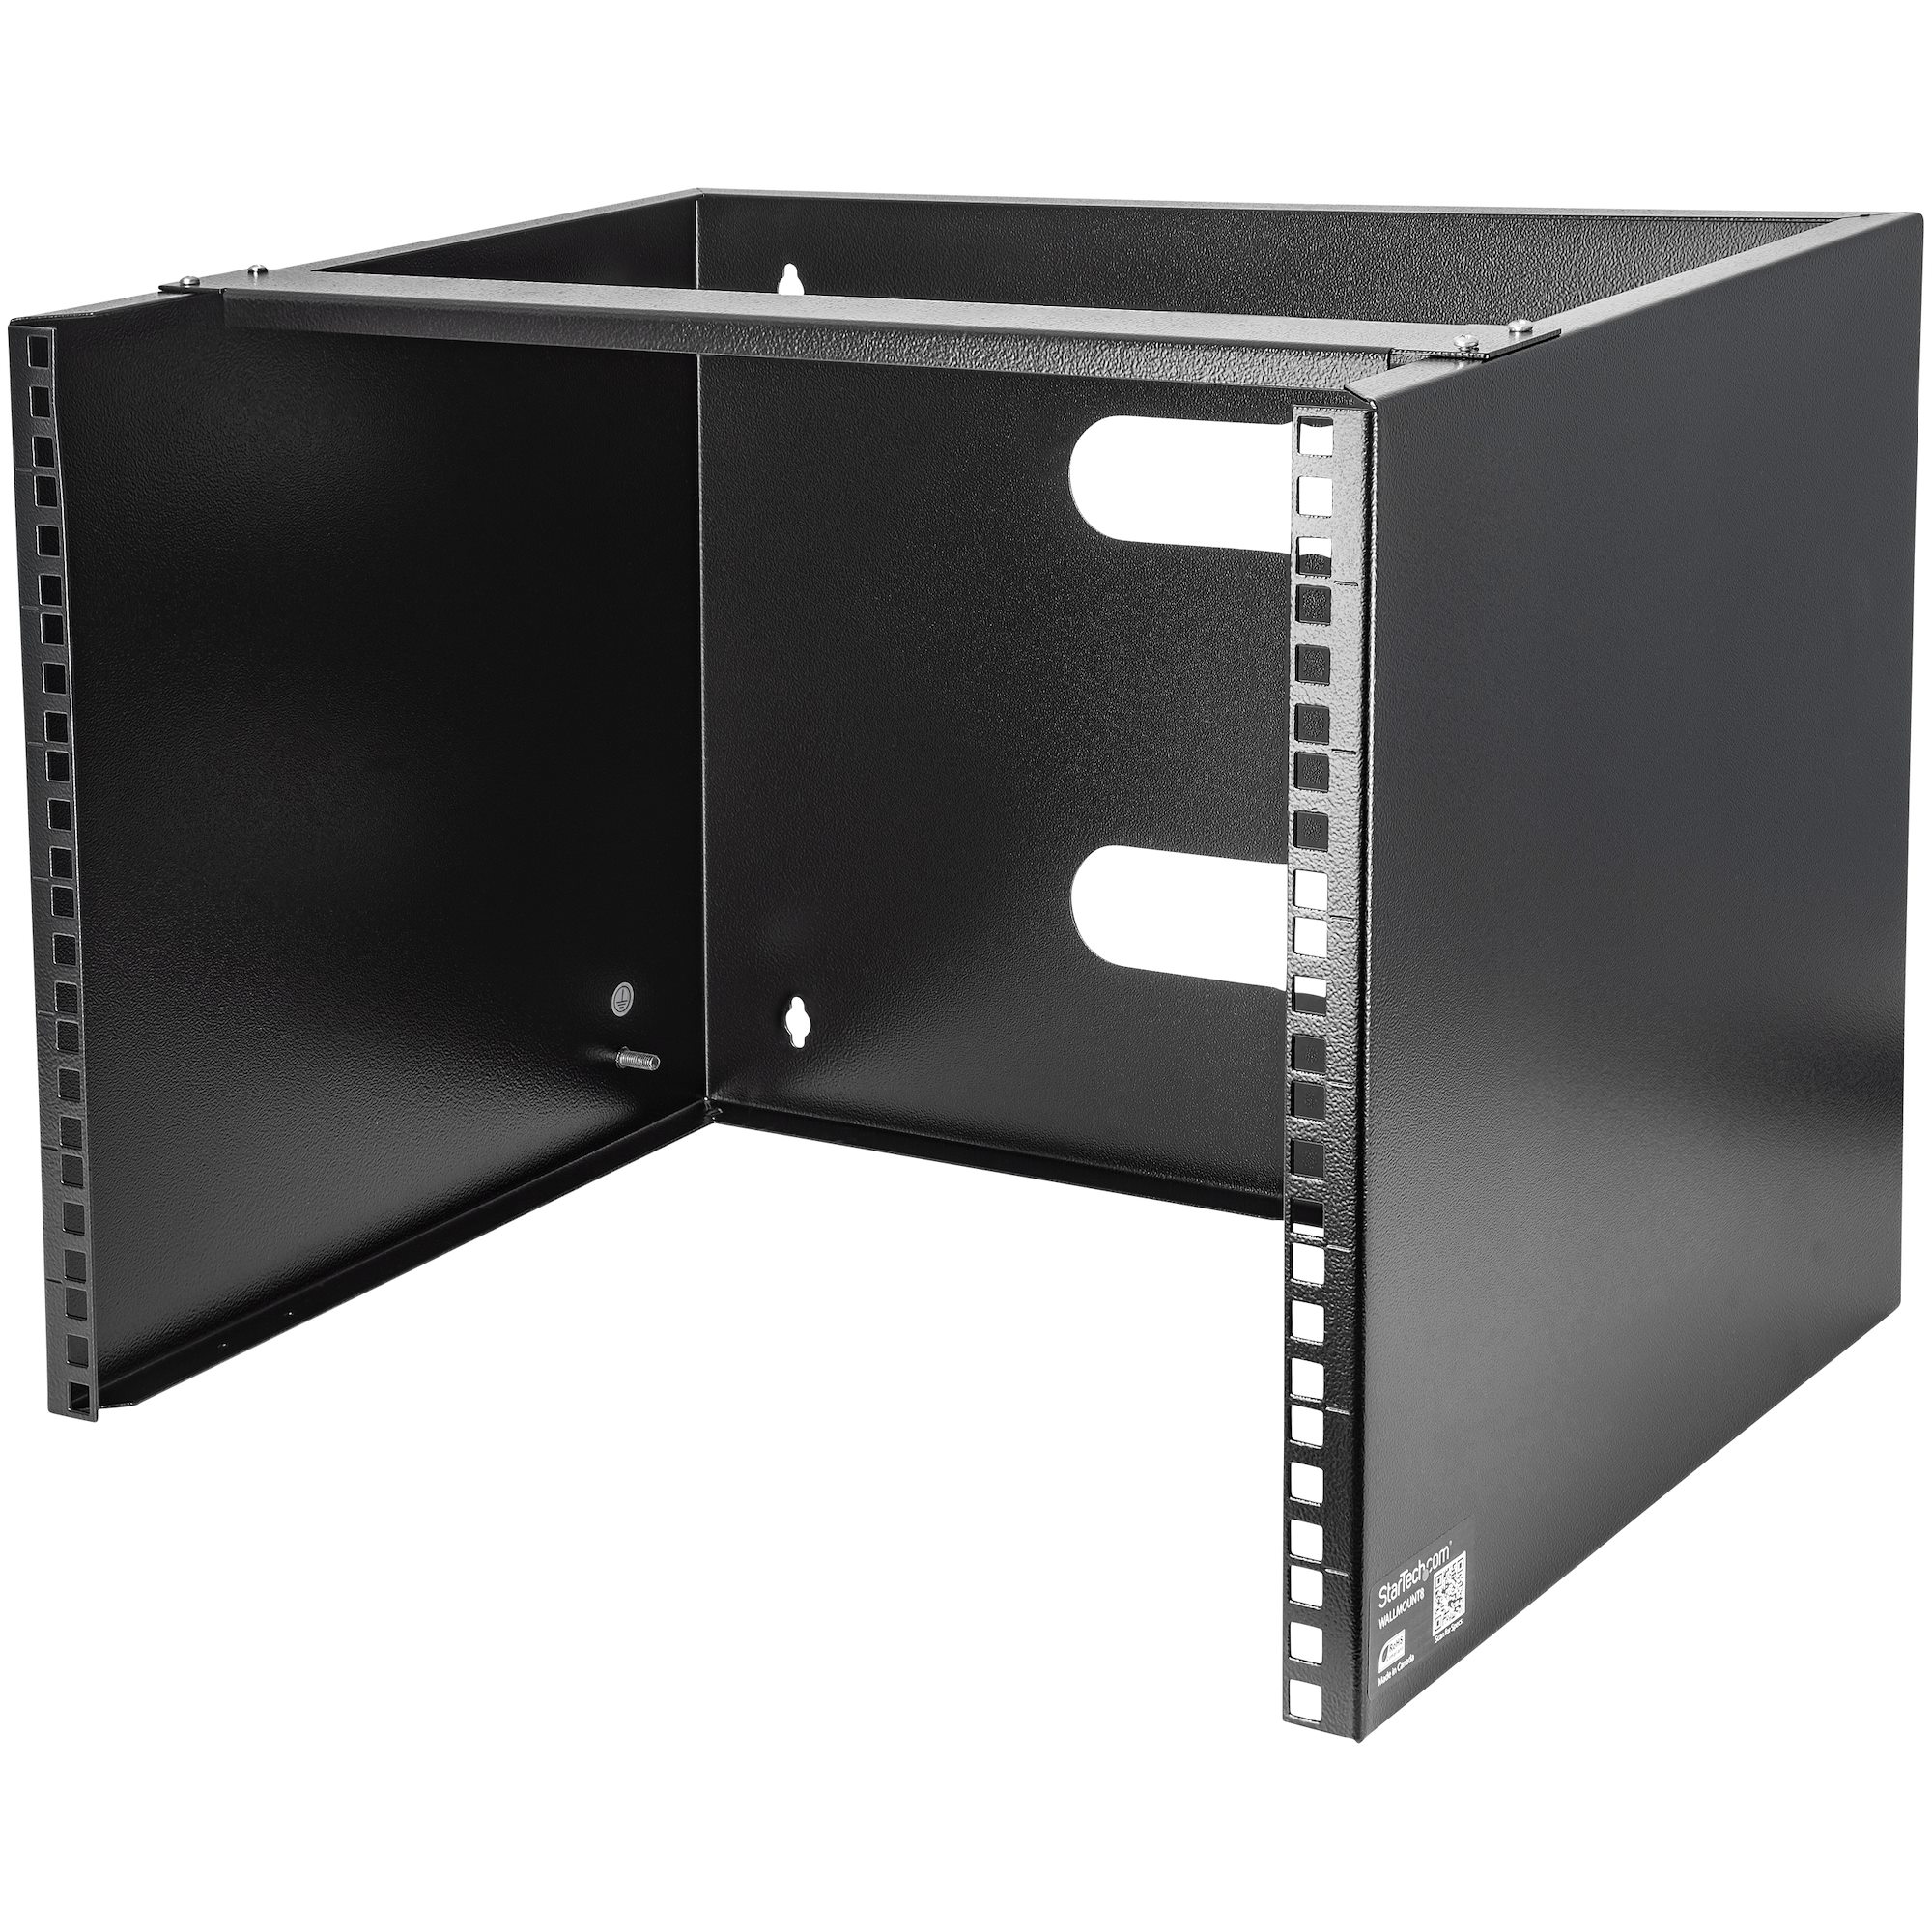 the part number is WALLMOUNT8